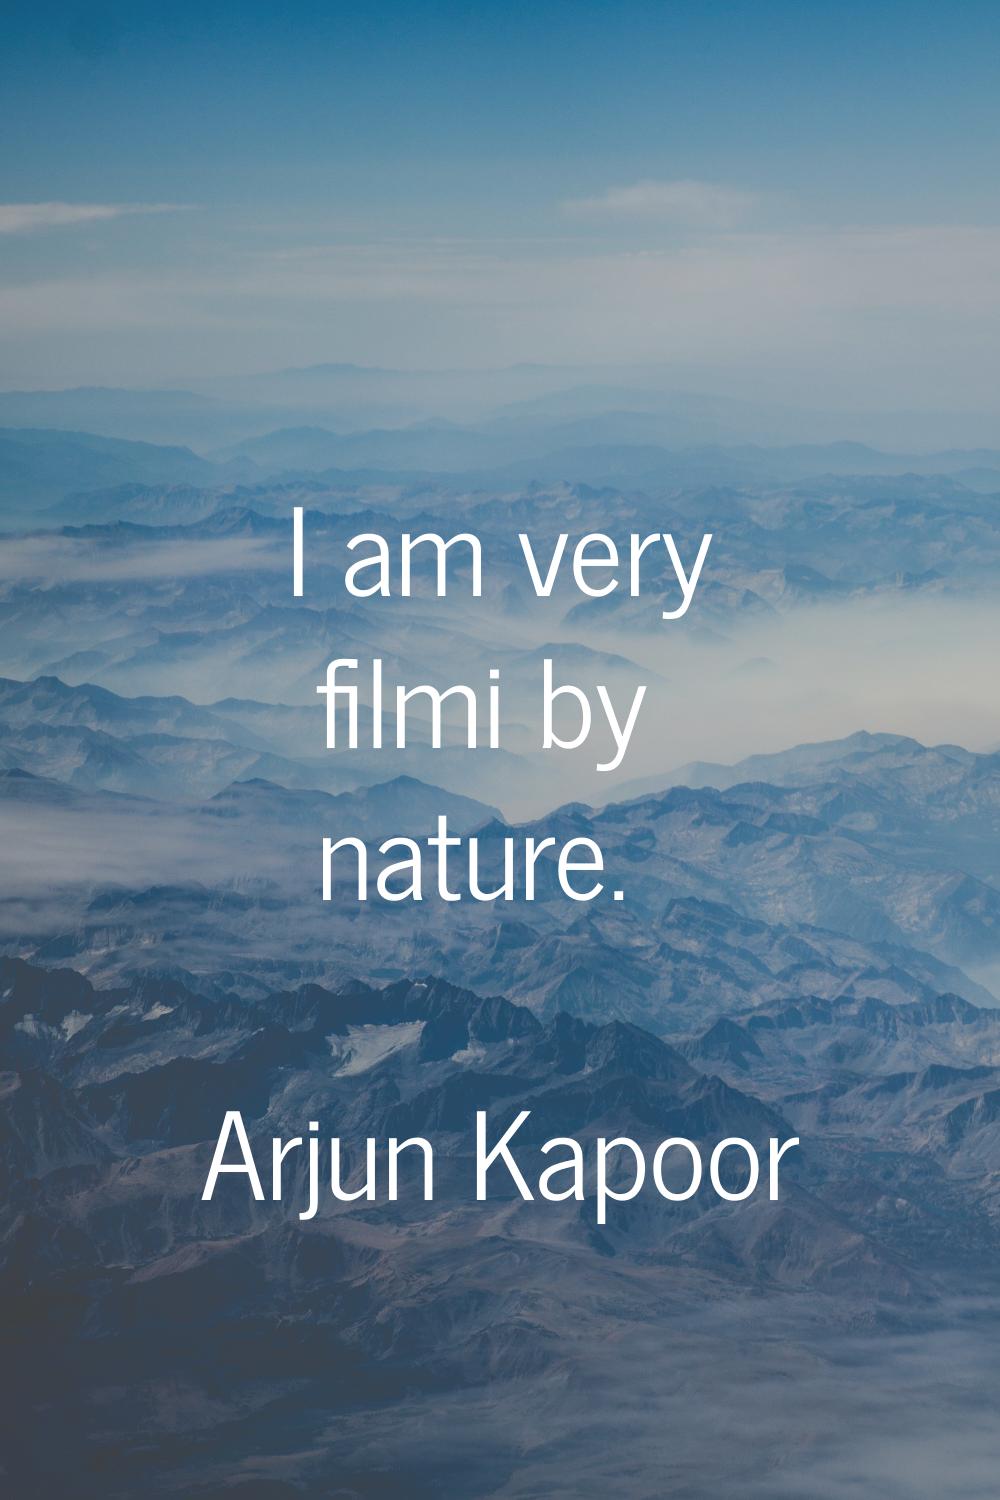 I am very filmi by nature.